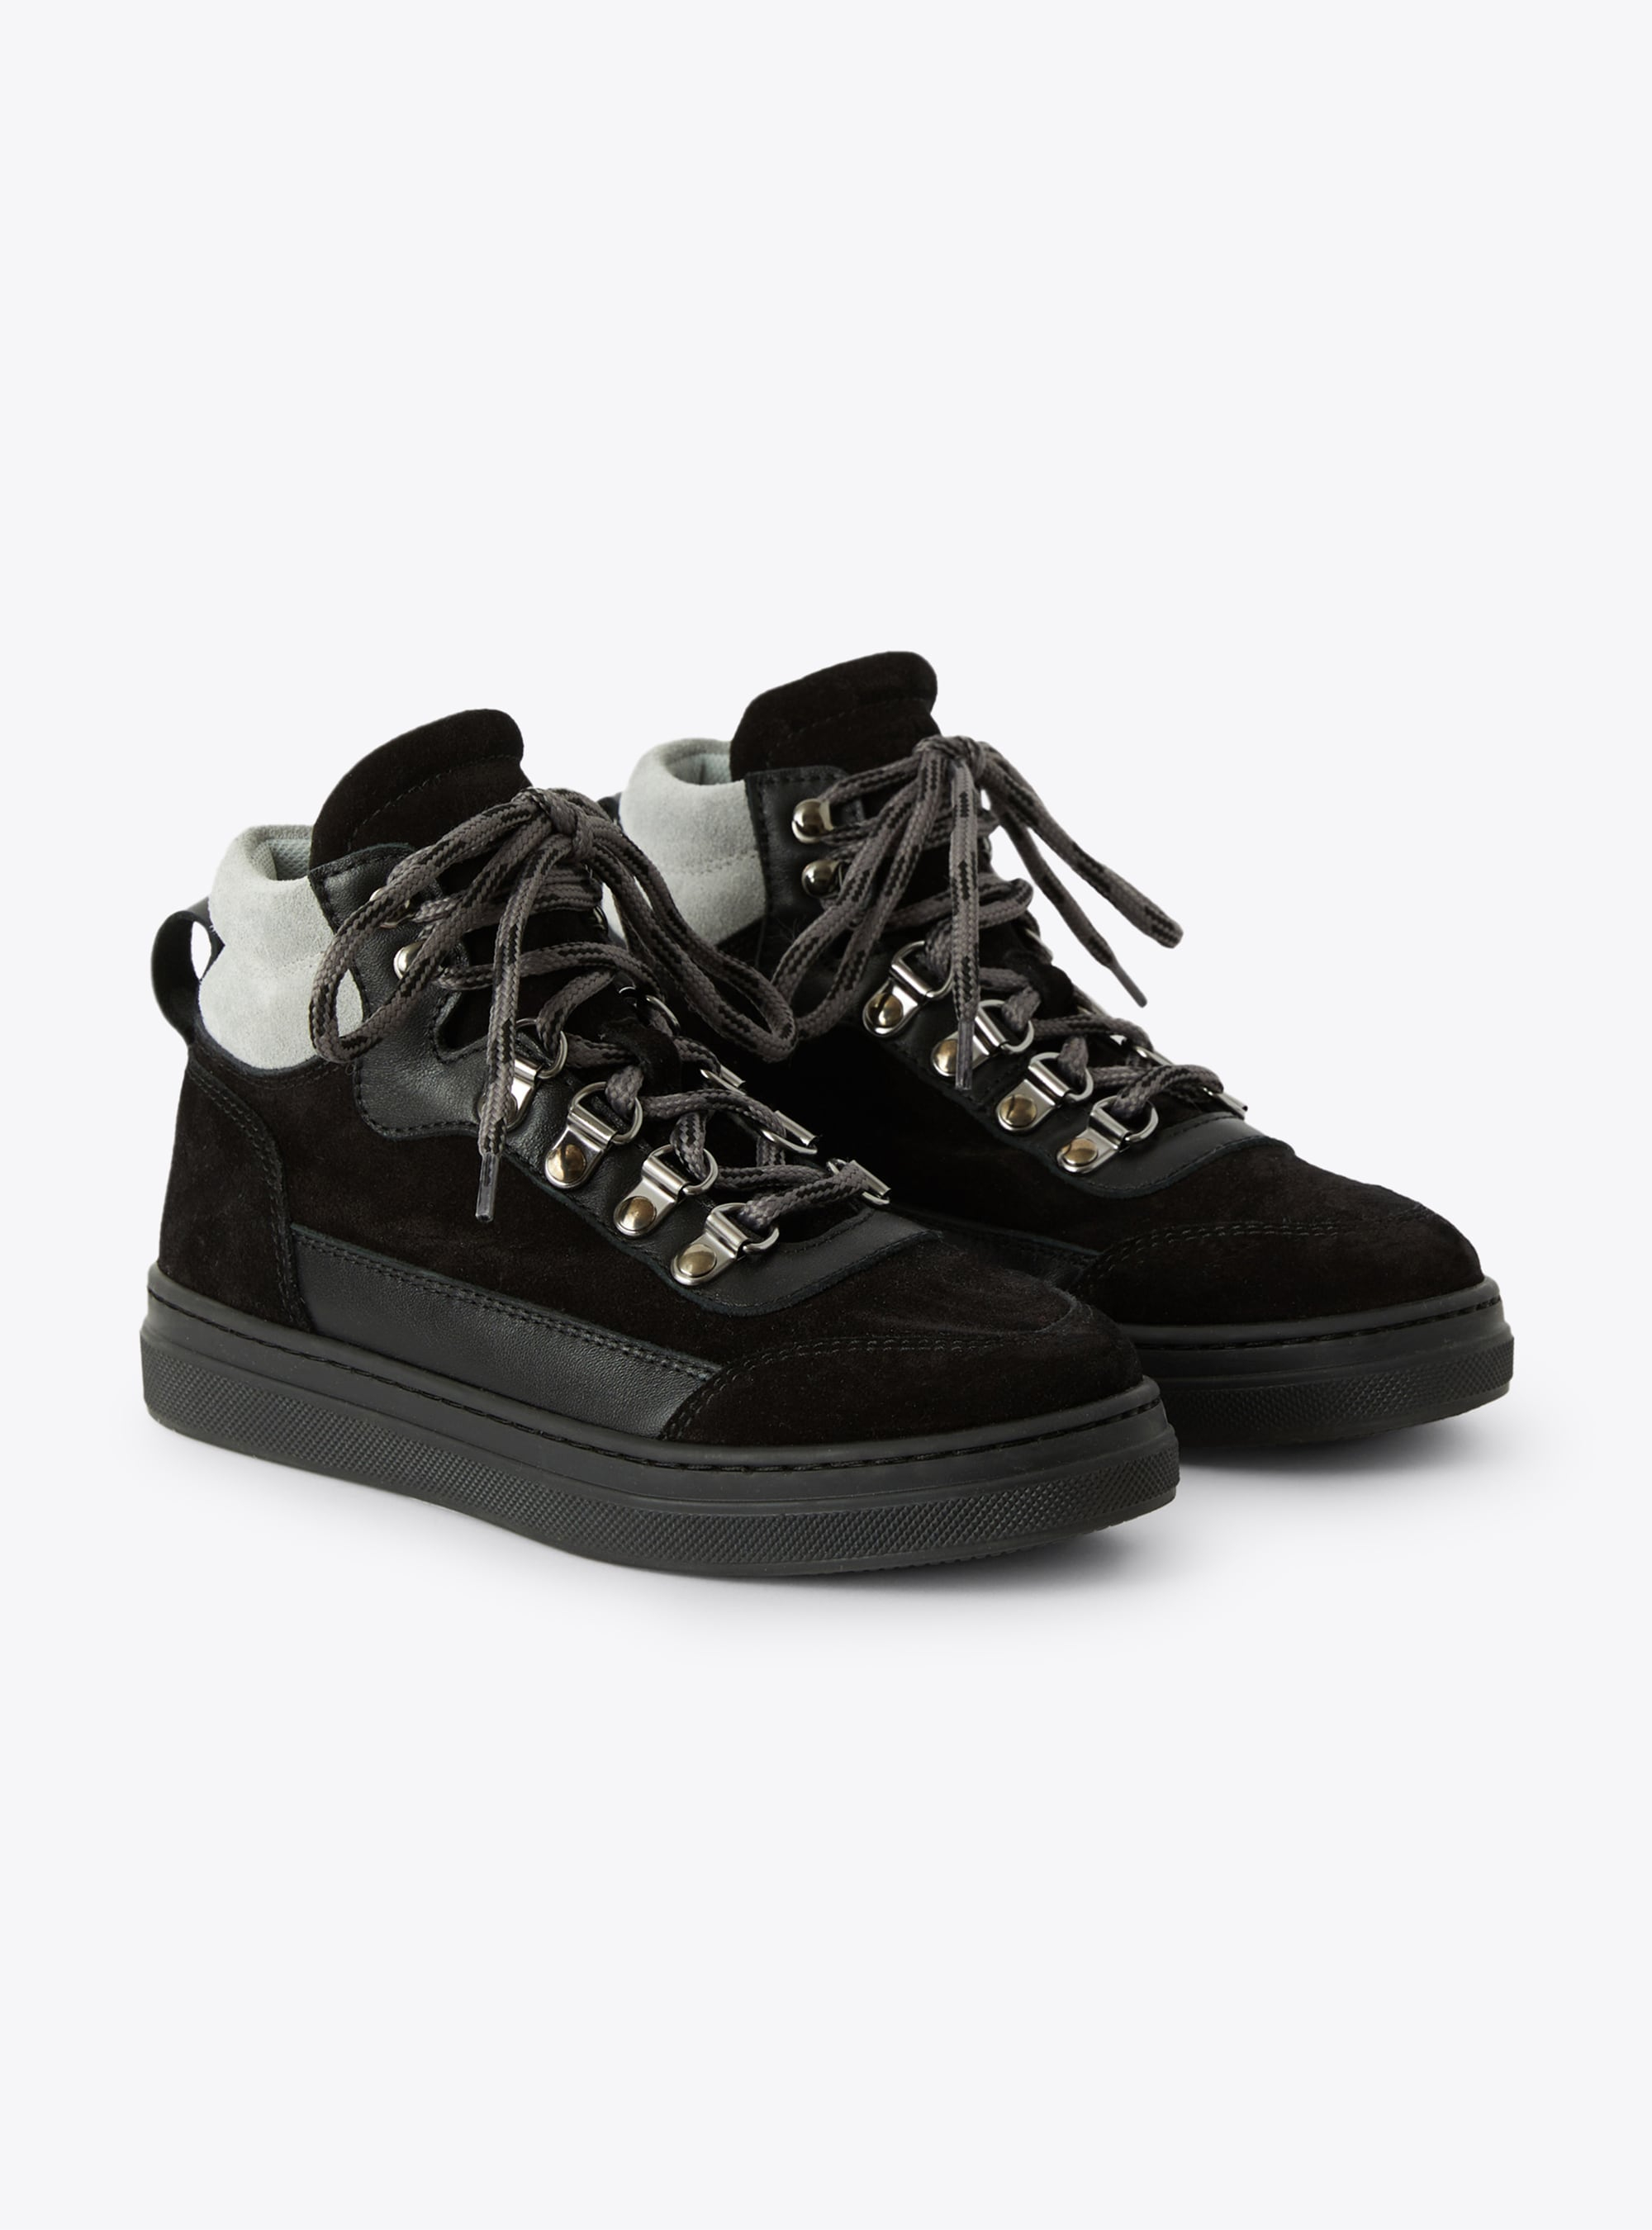 Black suede sneakers - Shoes - Il Gufo